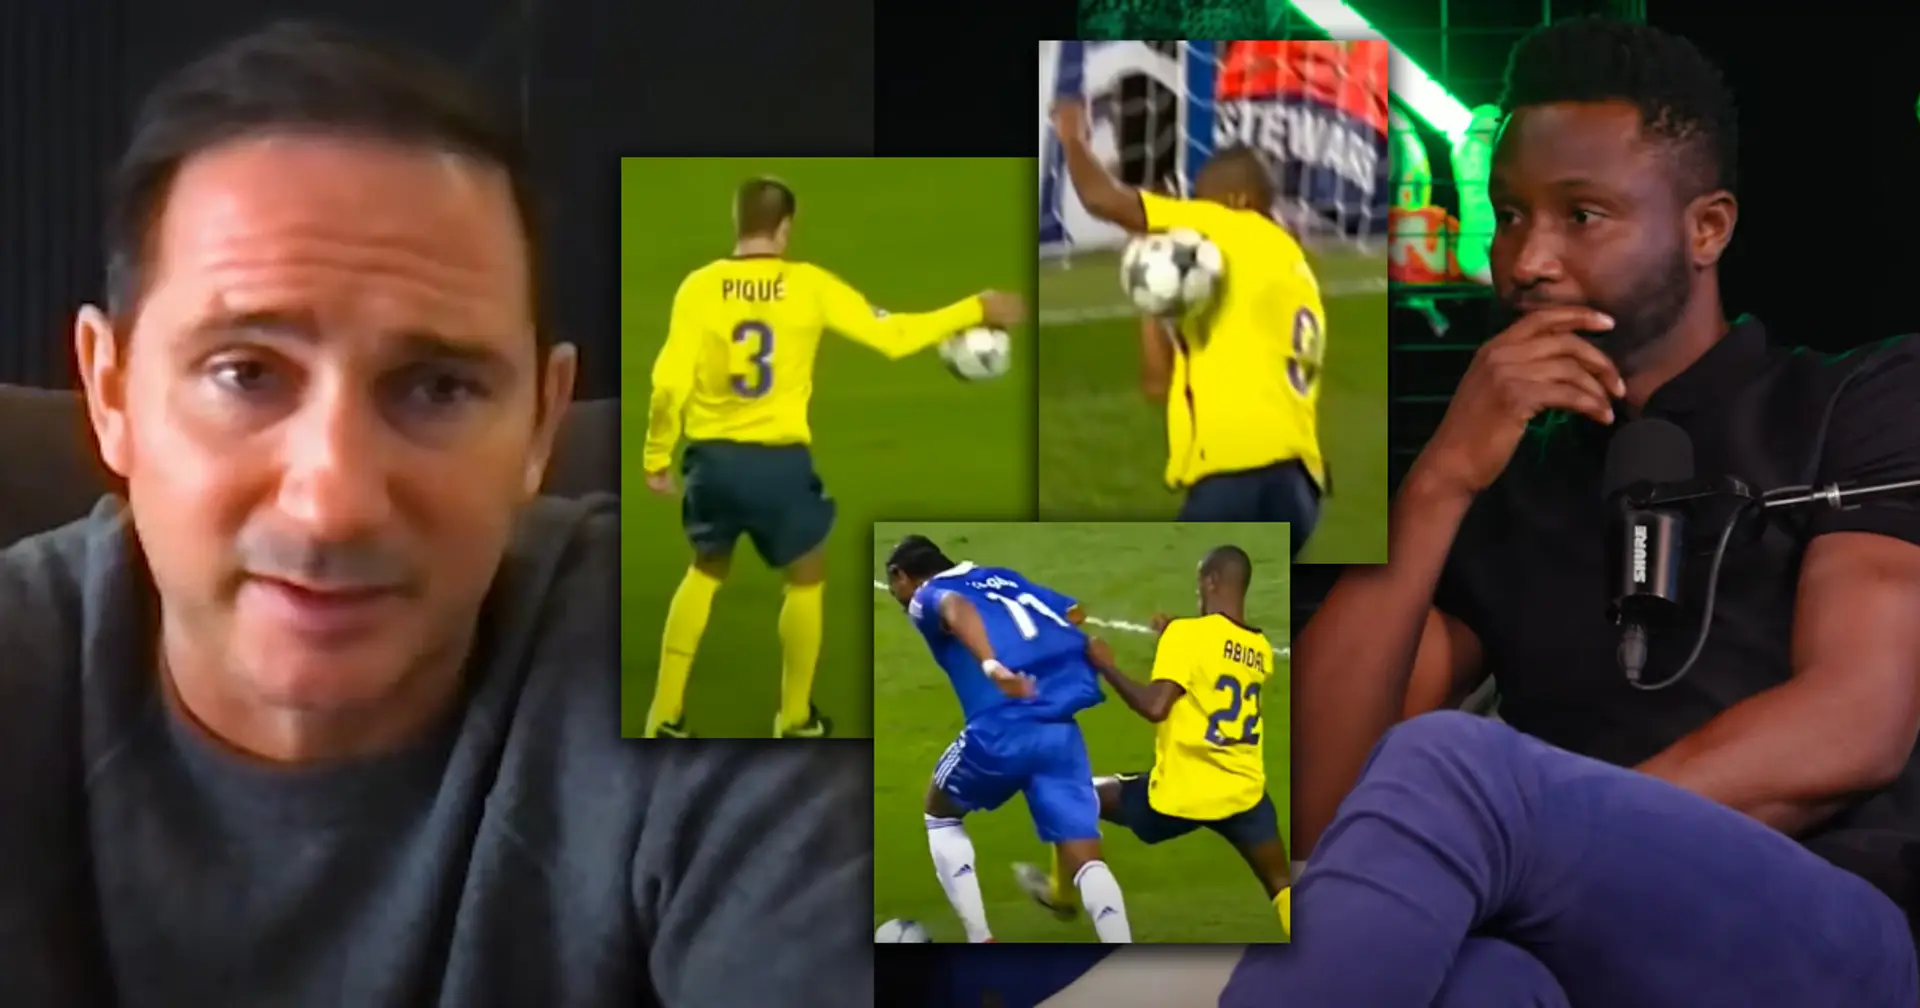 John Obi Mikel's face says it all as Lampard brings up Barca game in 2009 with Ovrebo as referee